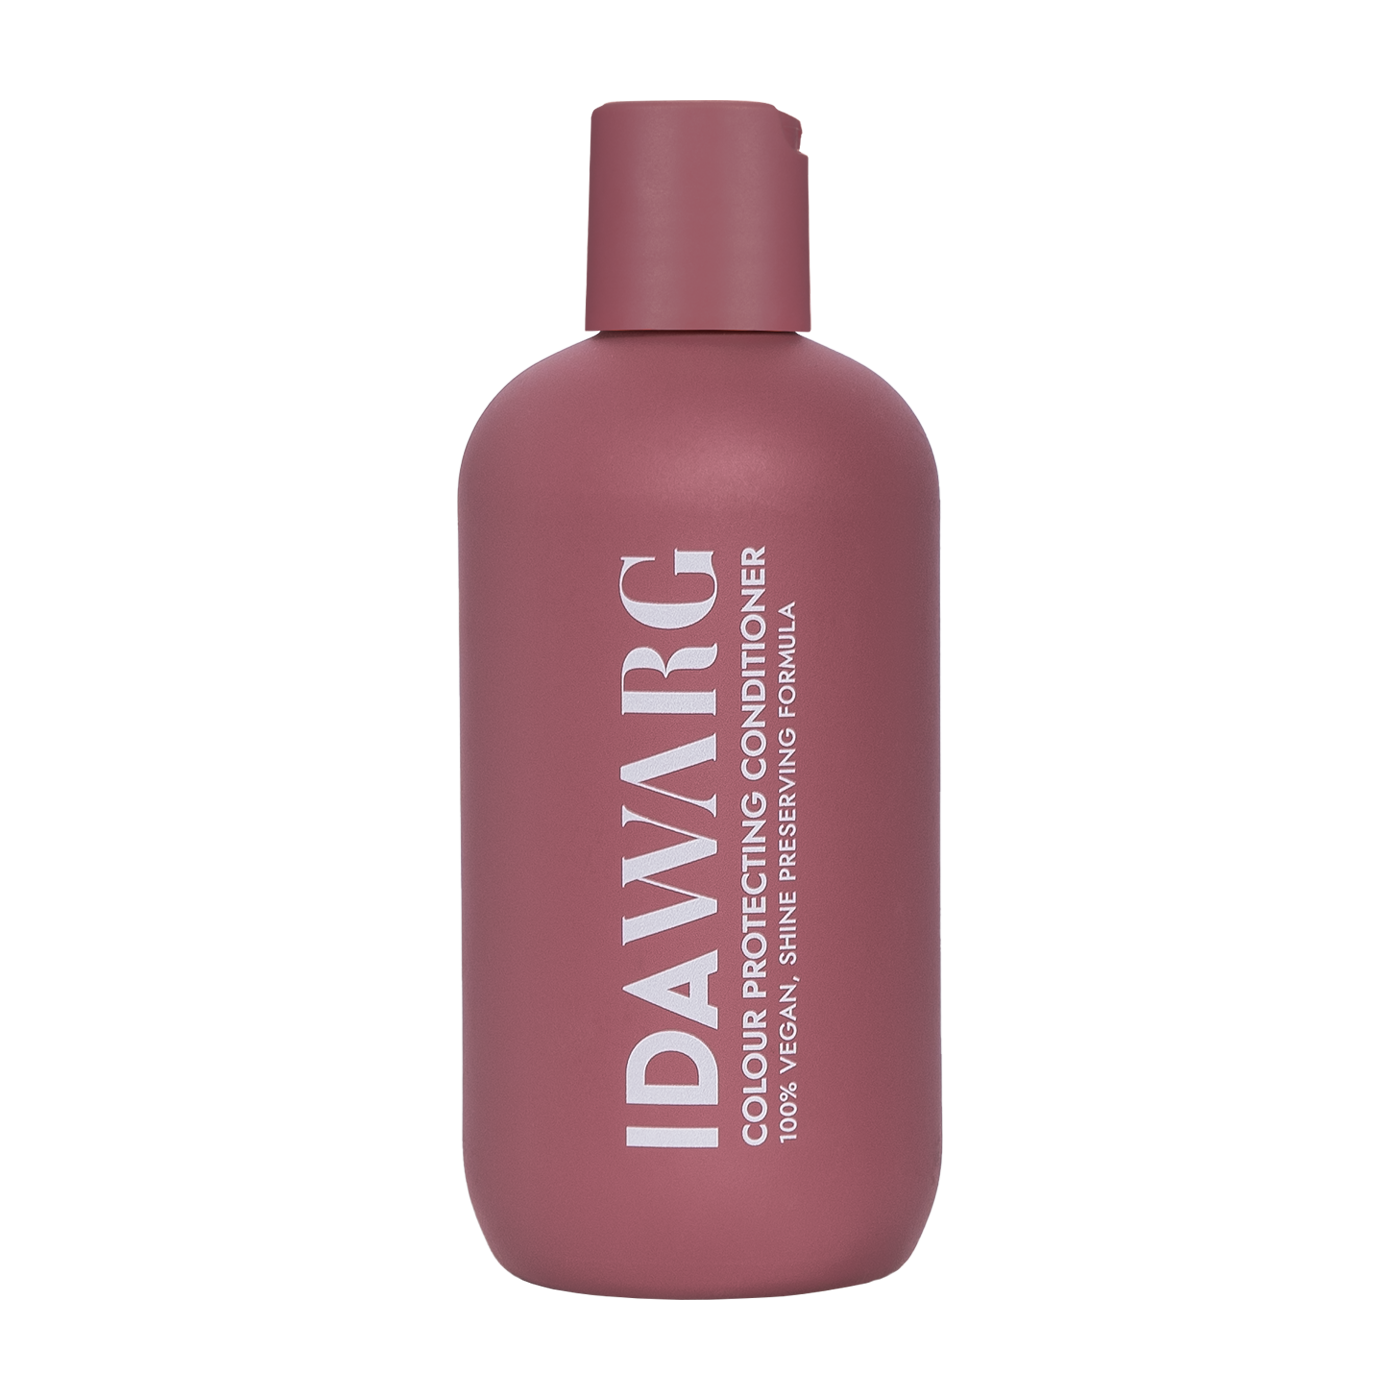 Ida Warg Beauty Colour Protecting Conditioner 250 ml